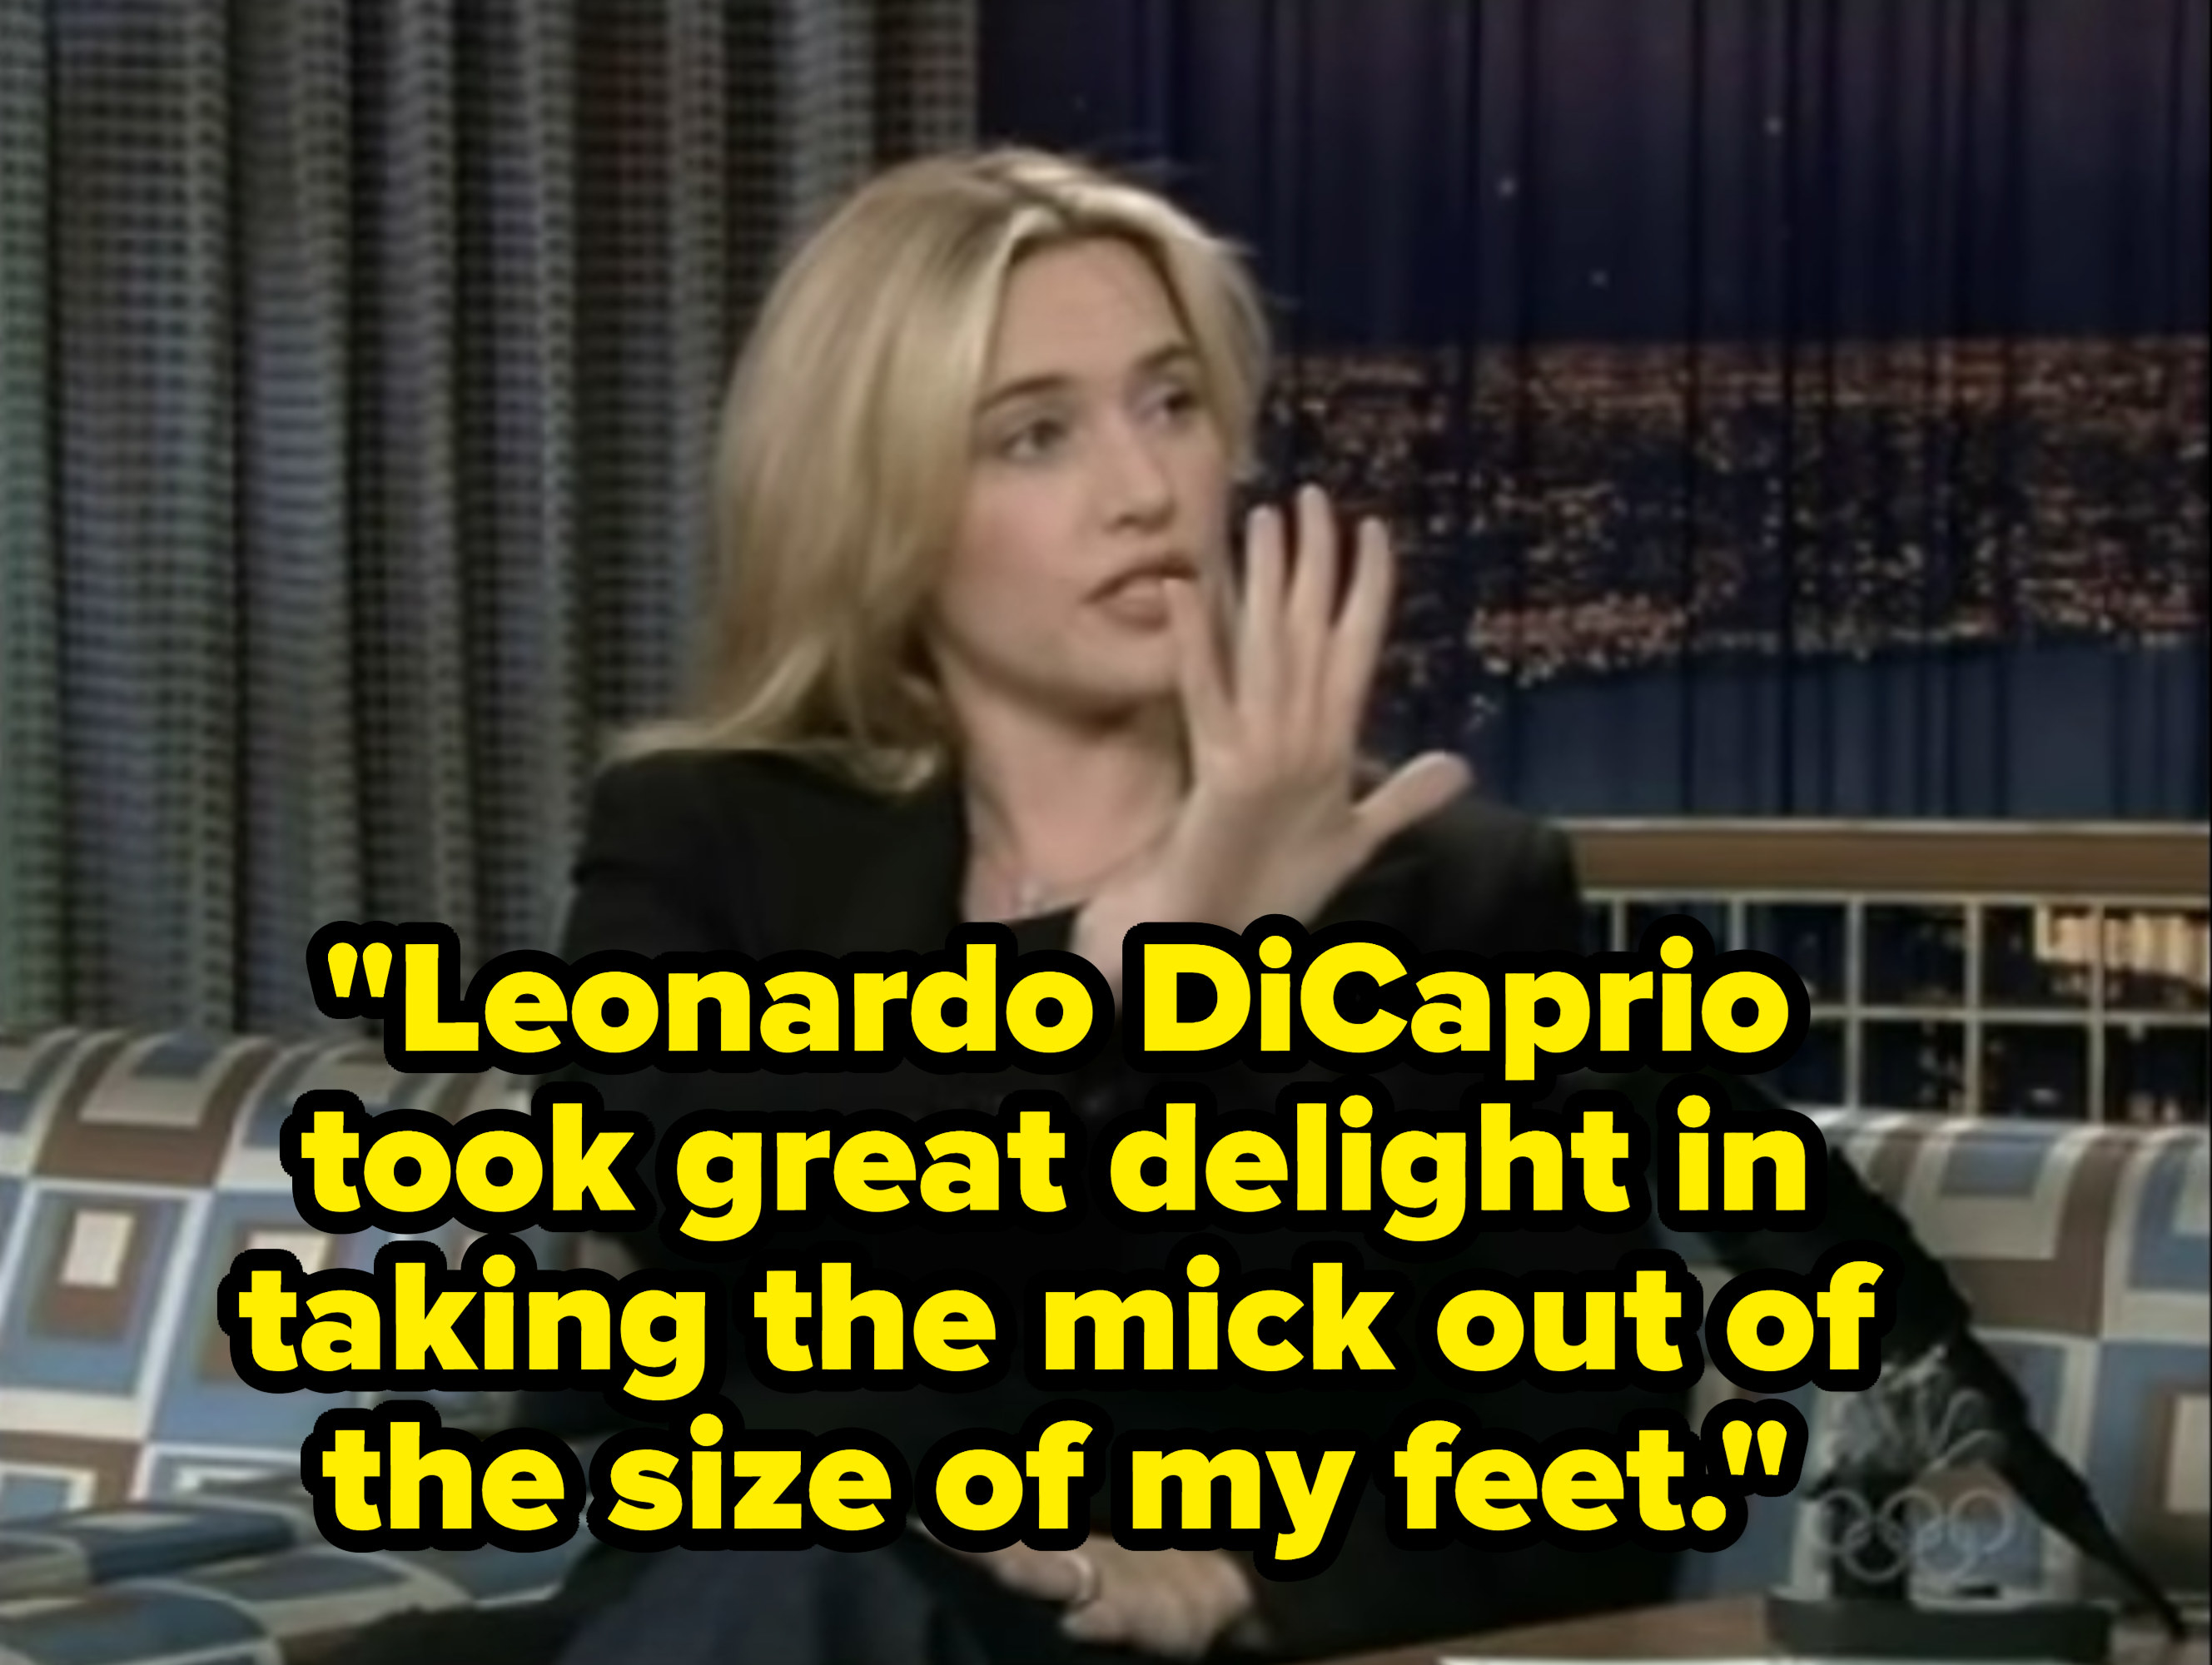 Kate saying on a talk show, &quot;Leonardo DiCaprio took great delight in taking the mick out of the size of my feet&quot;